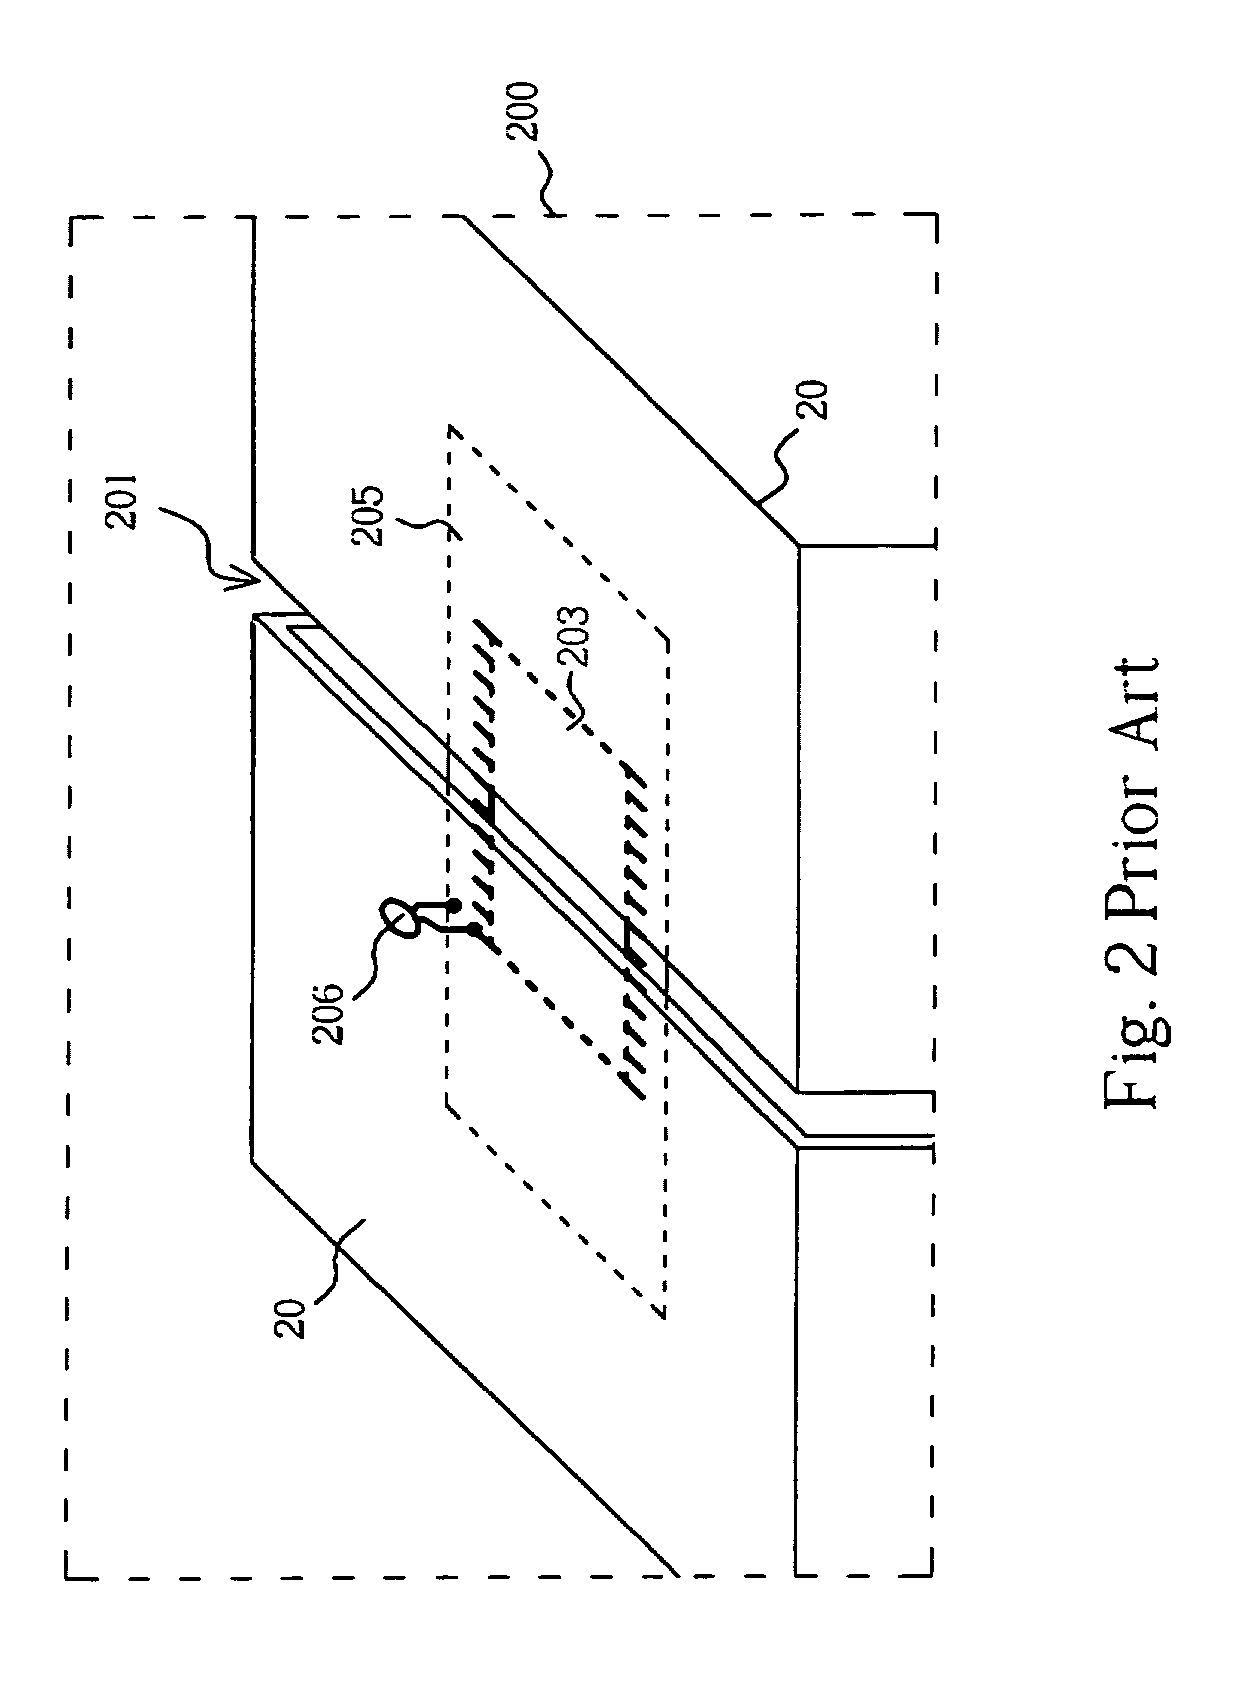 Electronic device capable of releasing ESD